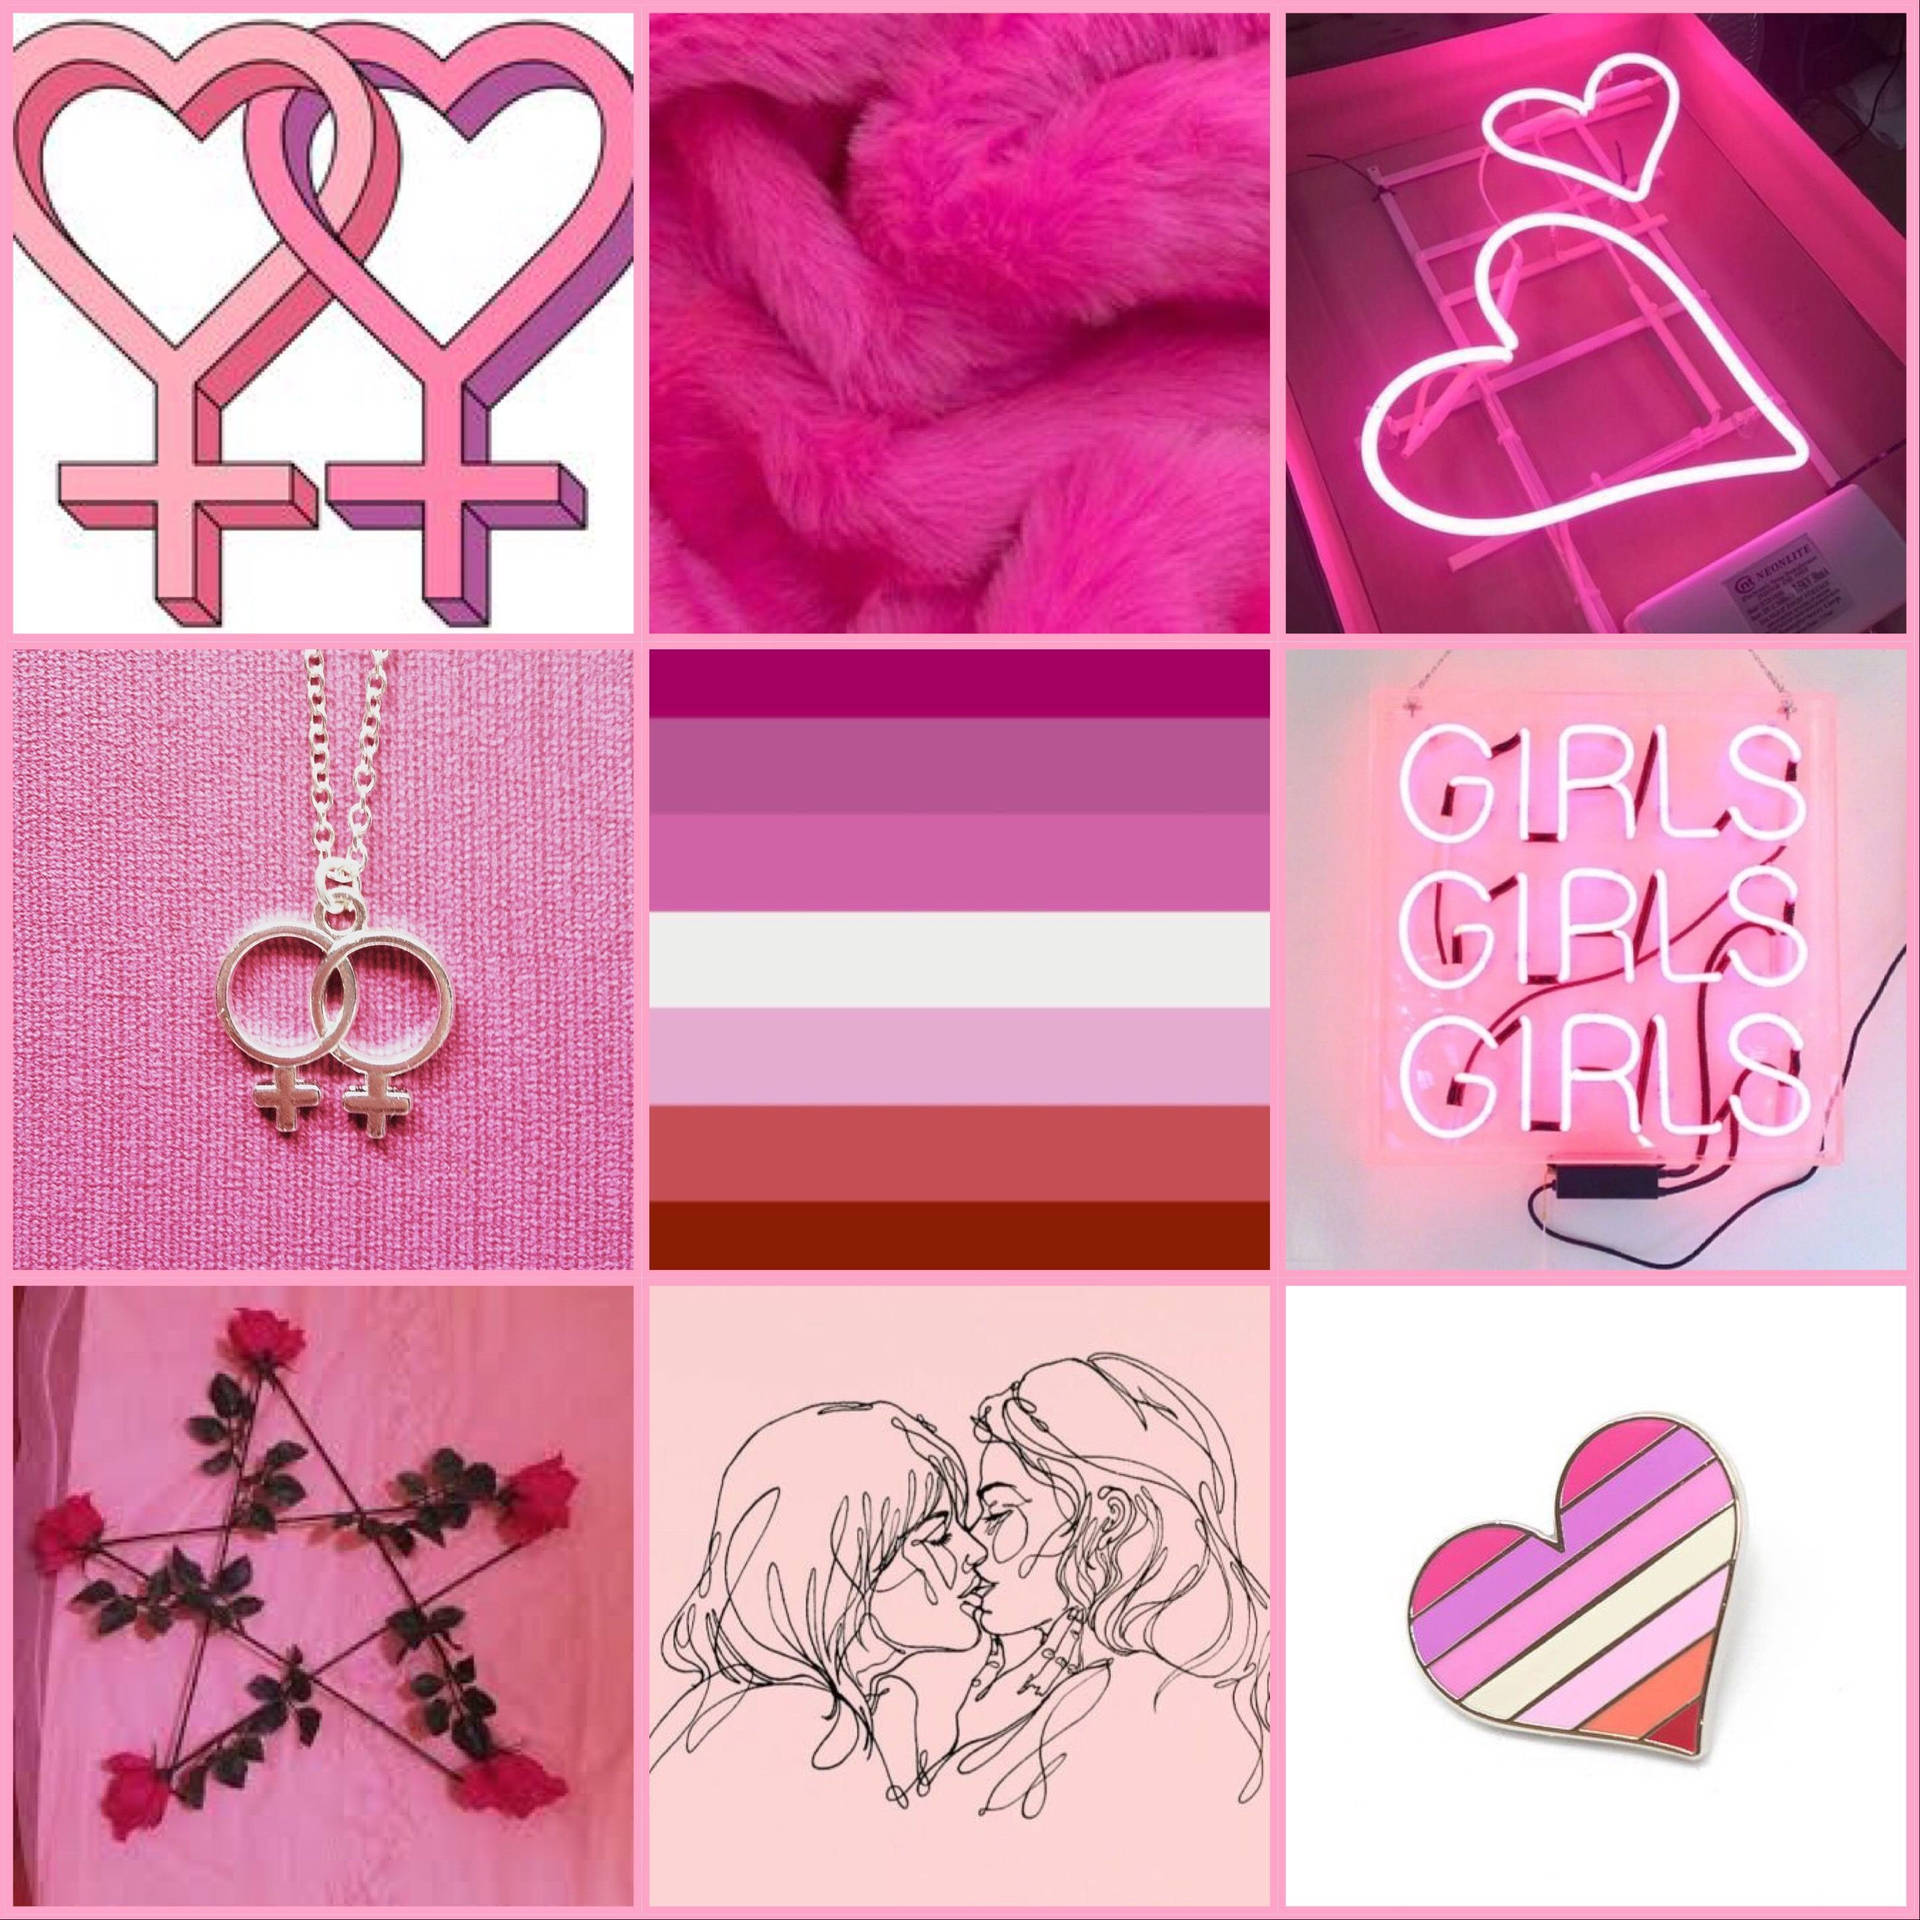 Iconic Lesbian Aesthetic Collage Wallpaper